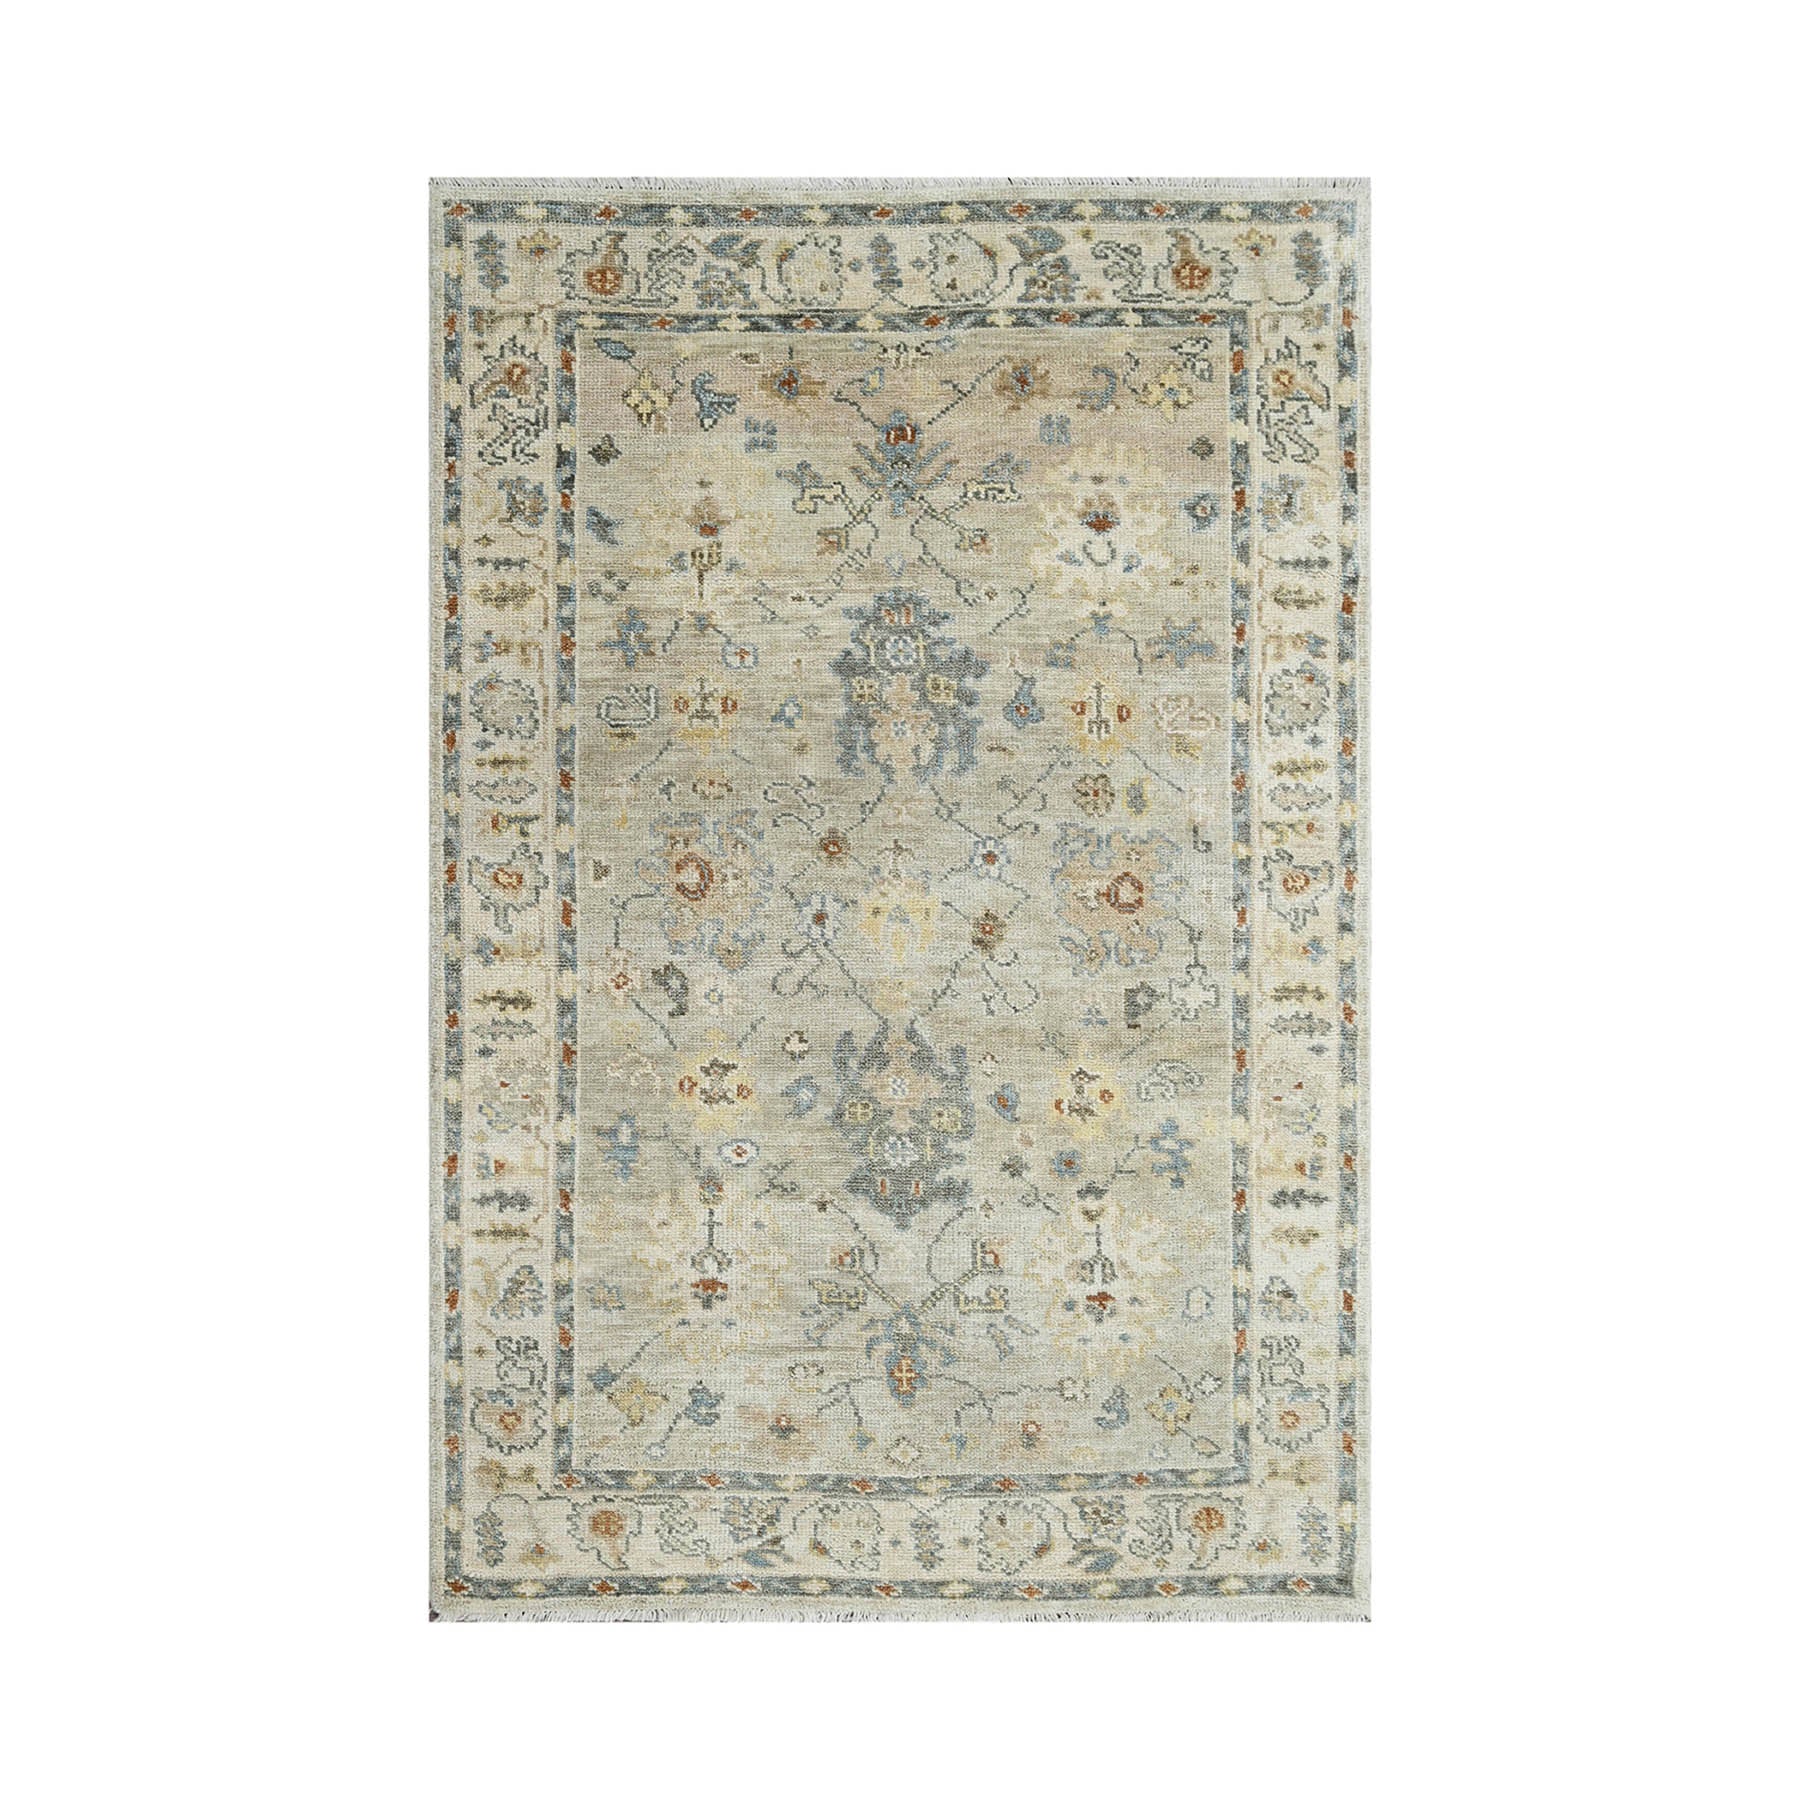 Naszir 6x9 Hand Knotted 100% Wool Oushak Traditional Oriental Area Rug Light Gray, Beige Color